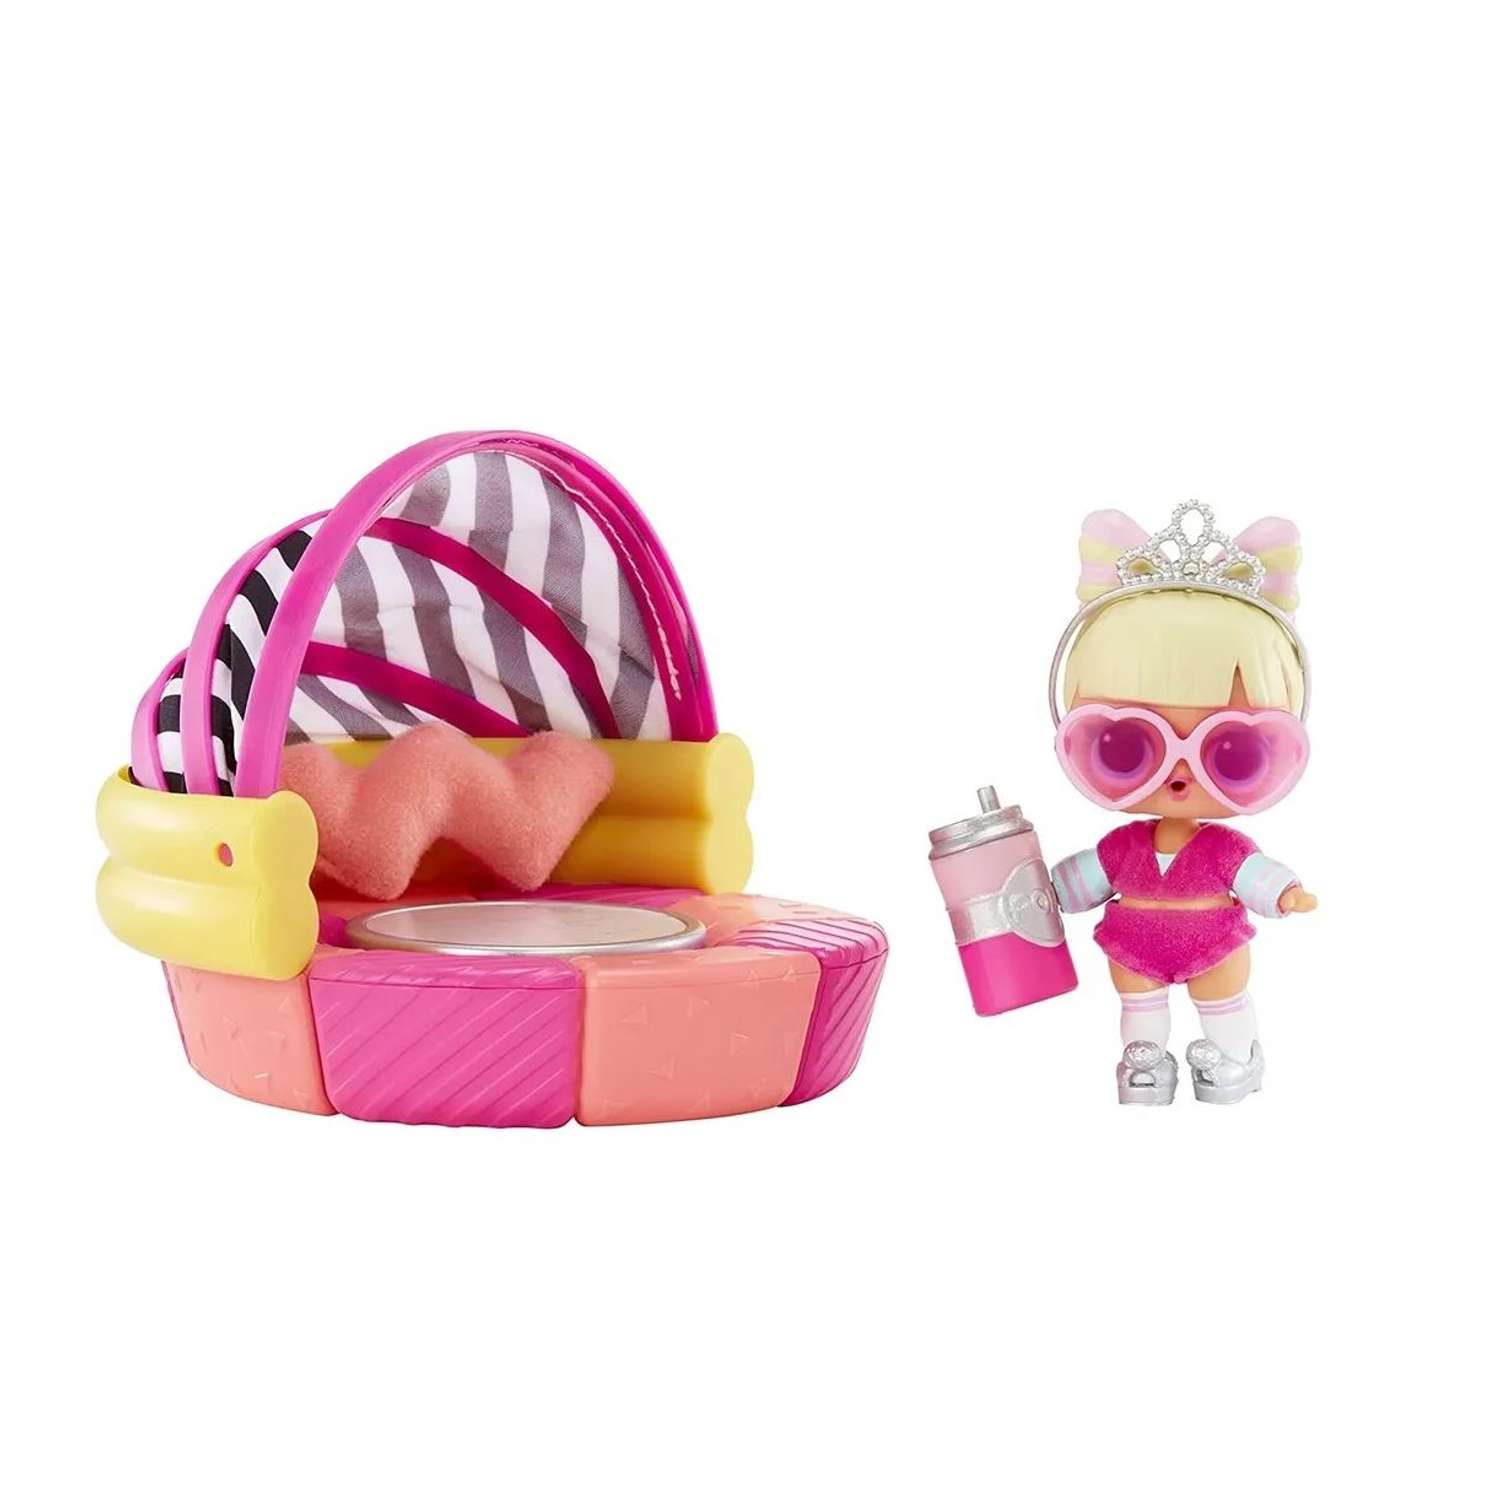 Кукла L.O.L. Surprise! Furniture Playset Day Bed and Suite Princess 580225EUC - фото 1